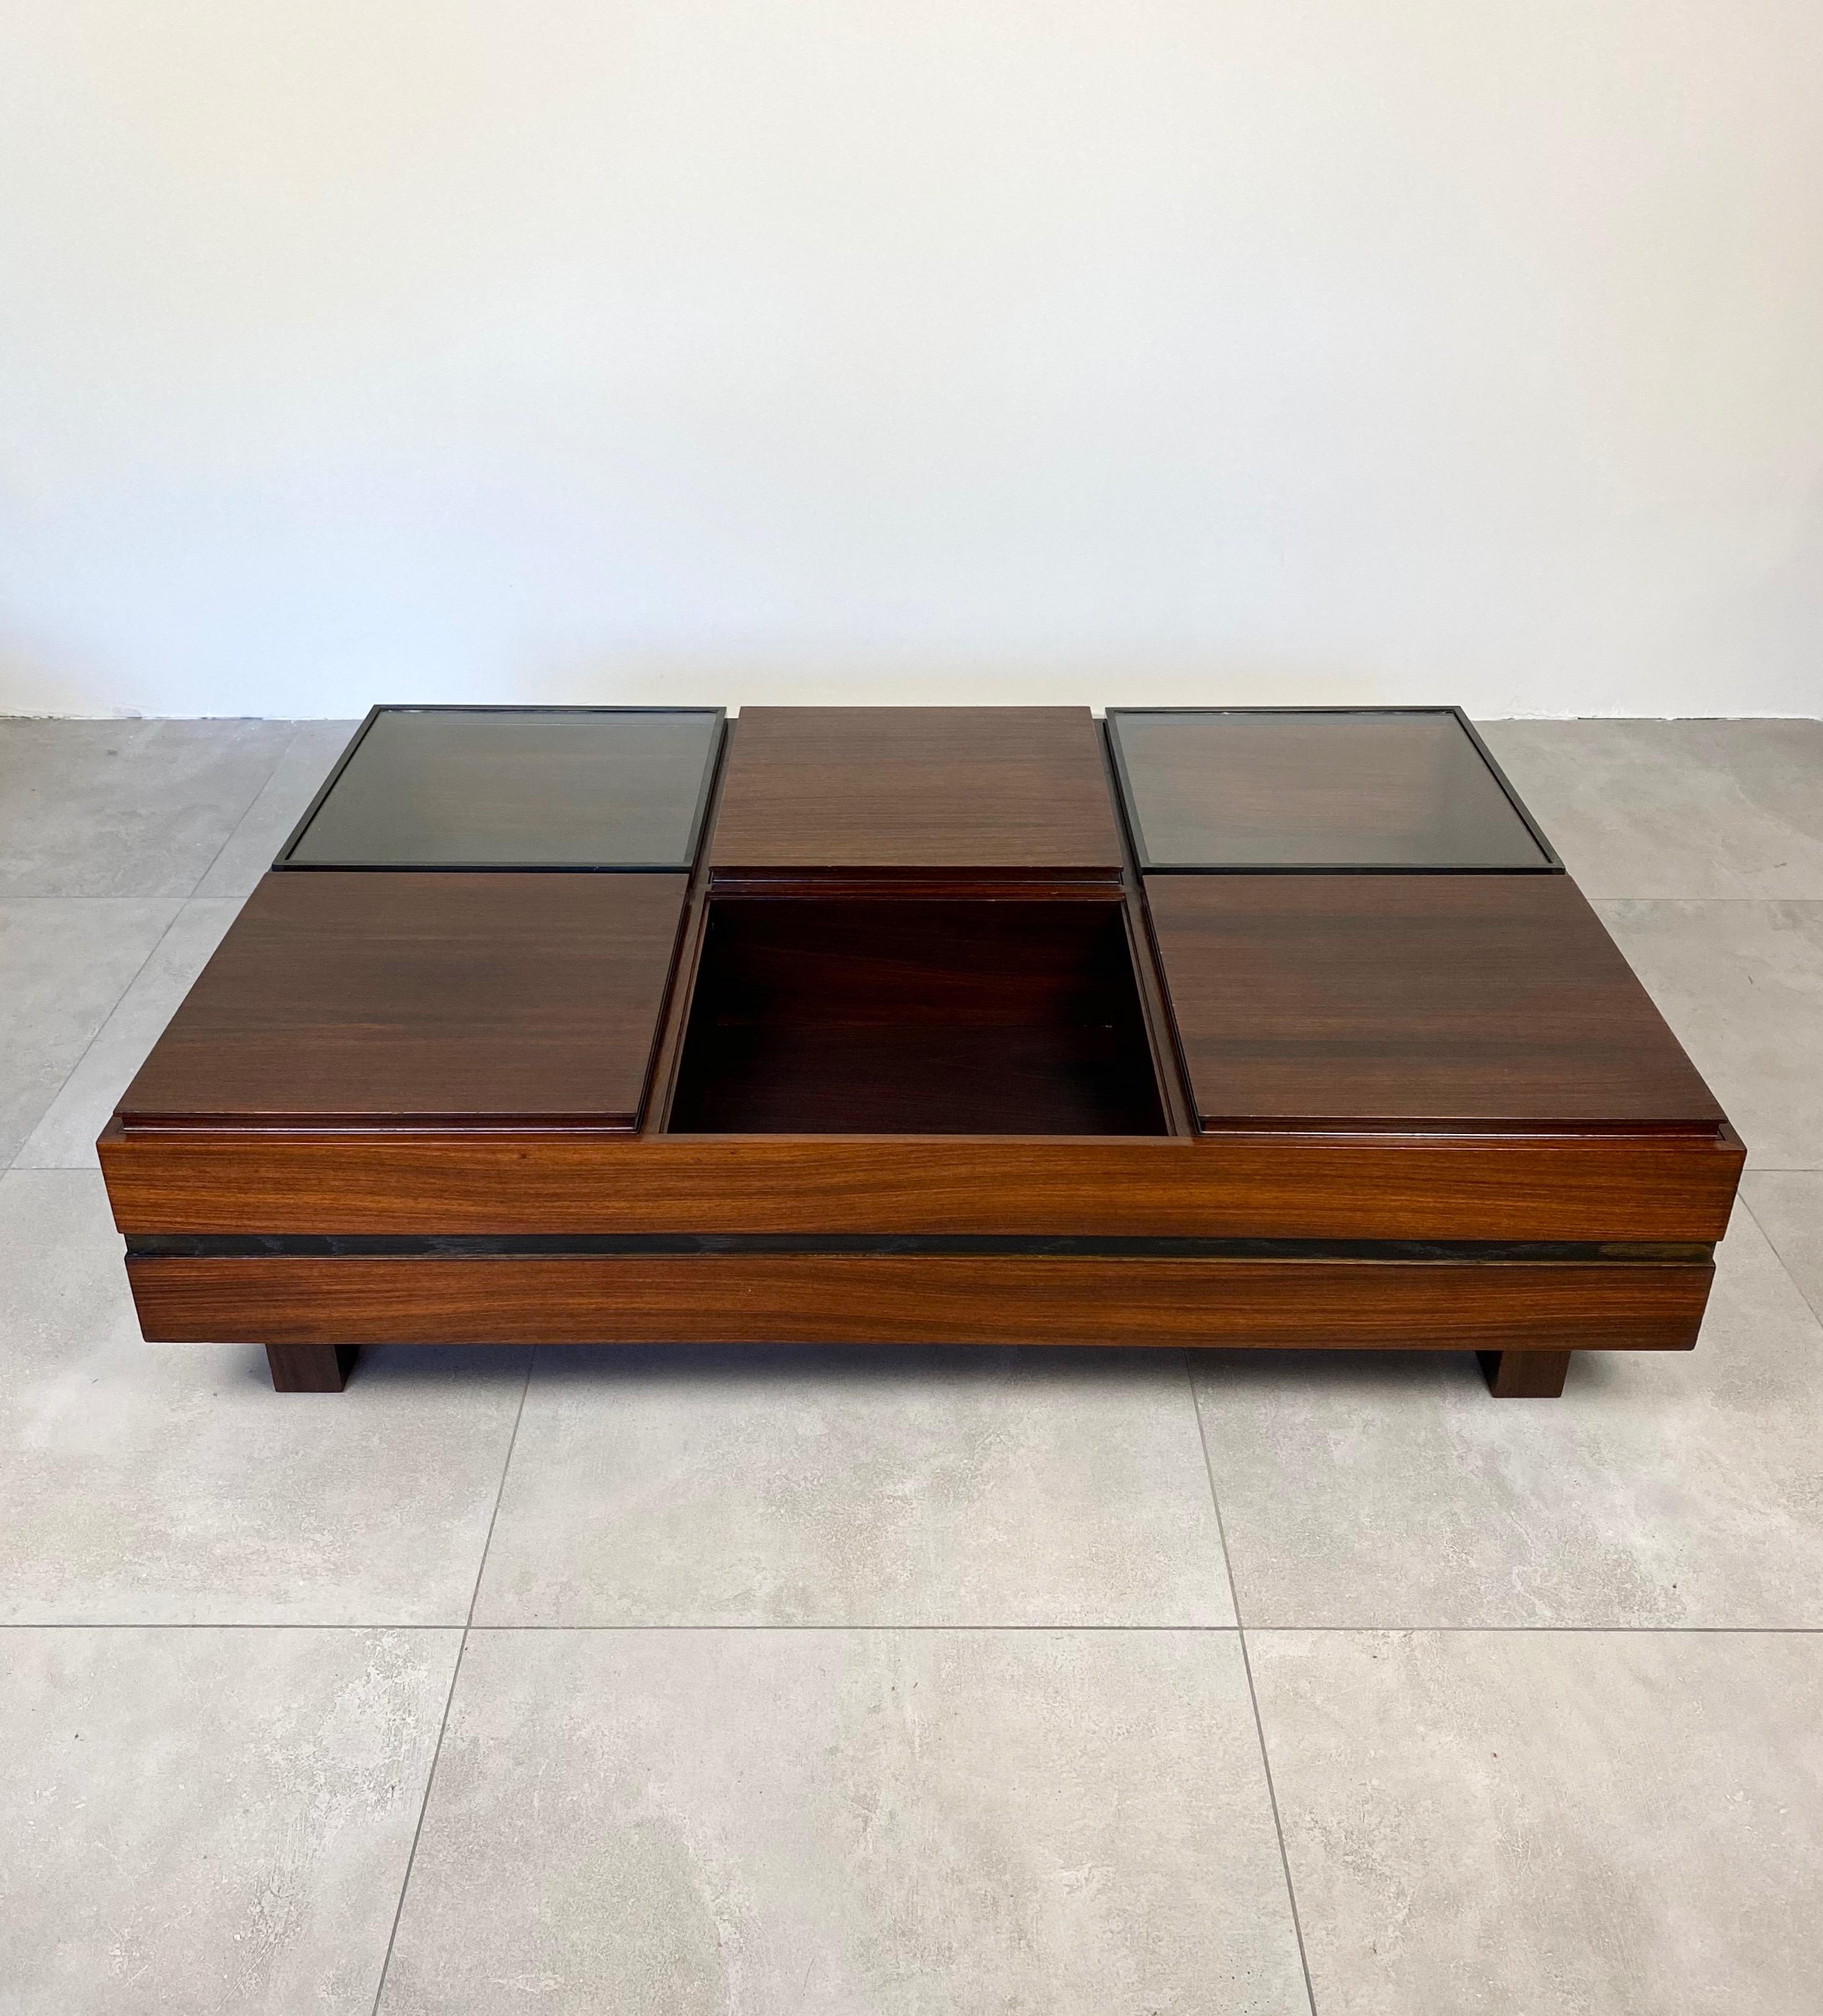 This modular rosewood coffee table produced by Luigi Sormani in the 1960s is divided into six different compartments: empty, removable tray, and glass lid. The sides are divided horizontally in half by a darker band, which lightens the profile of